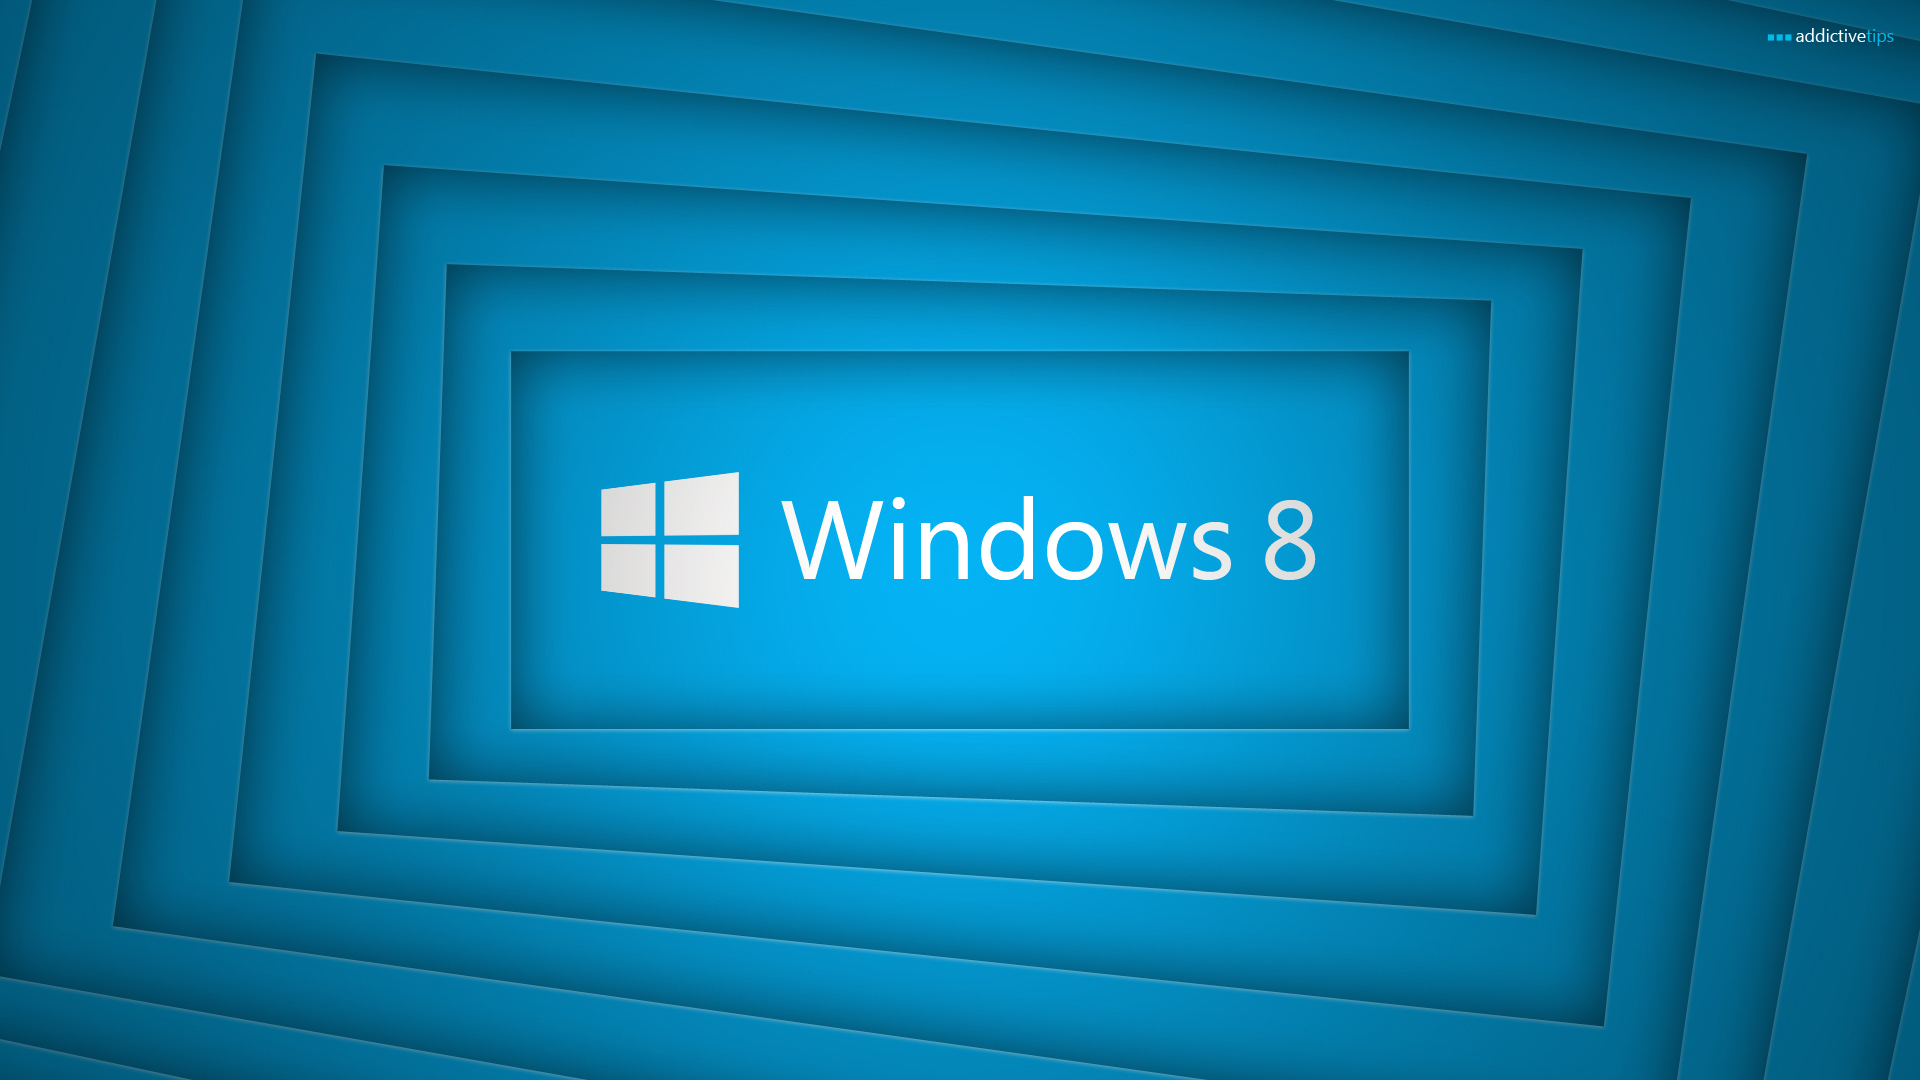 Download Our Windows 8 Metro Wallpapers